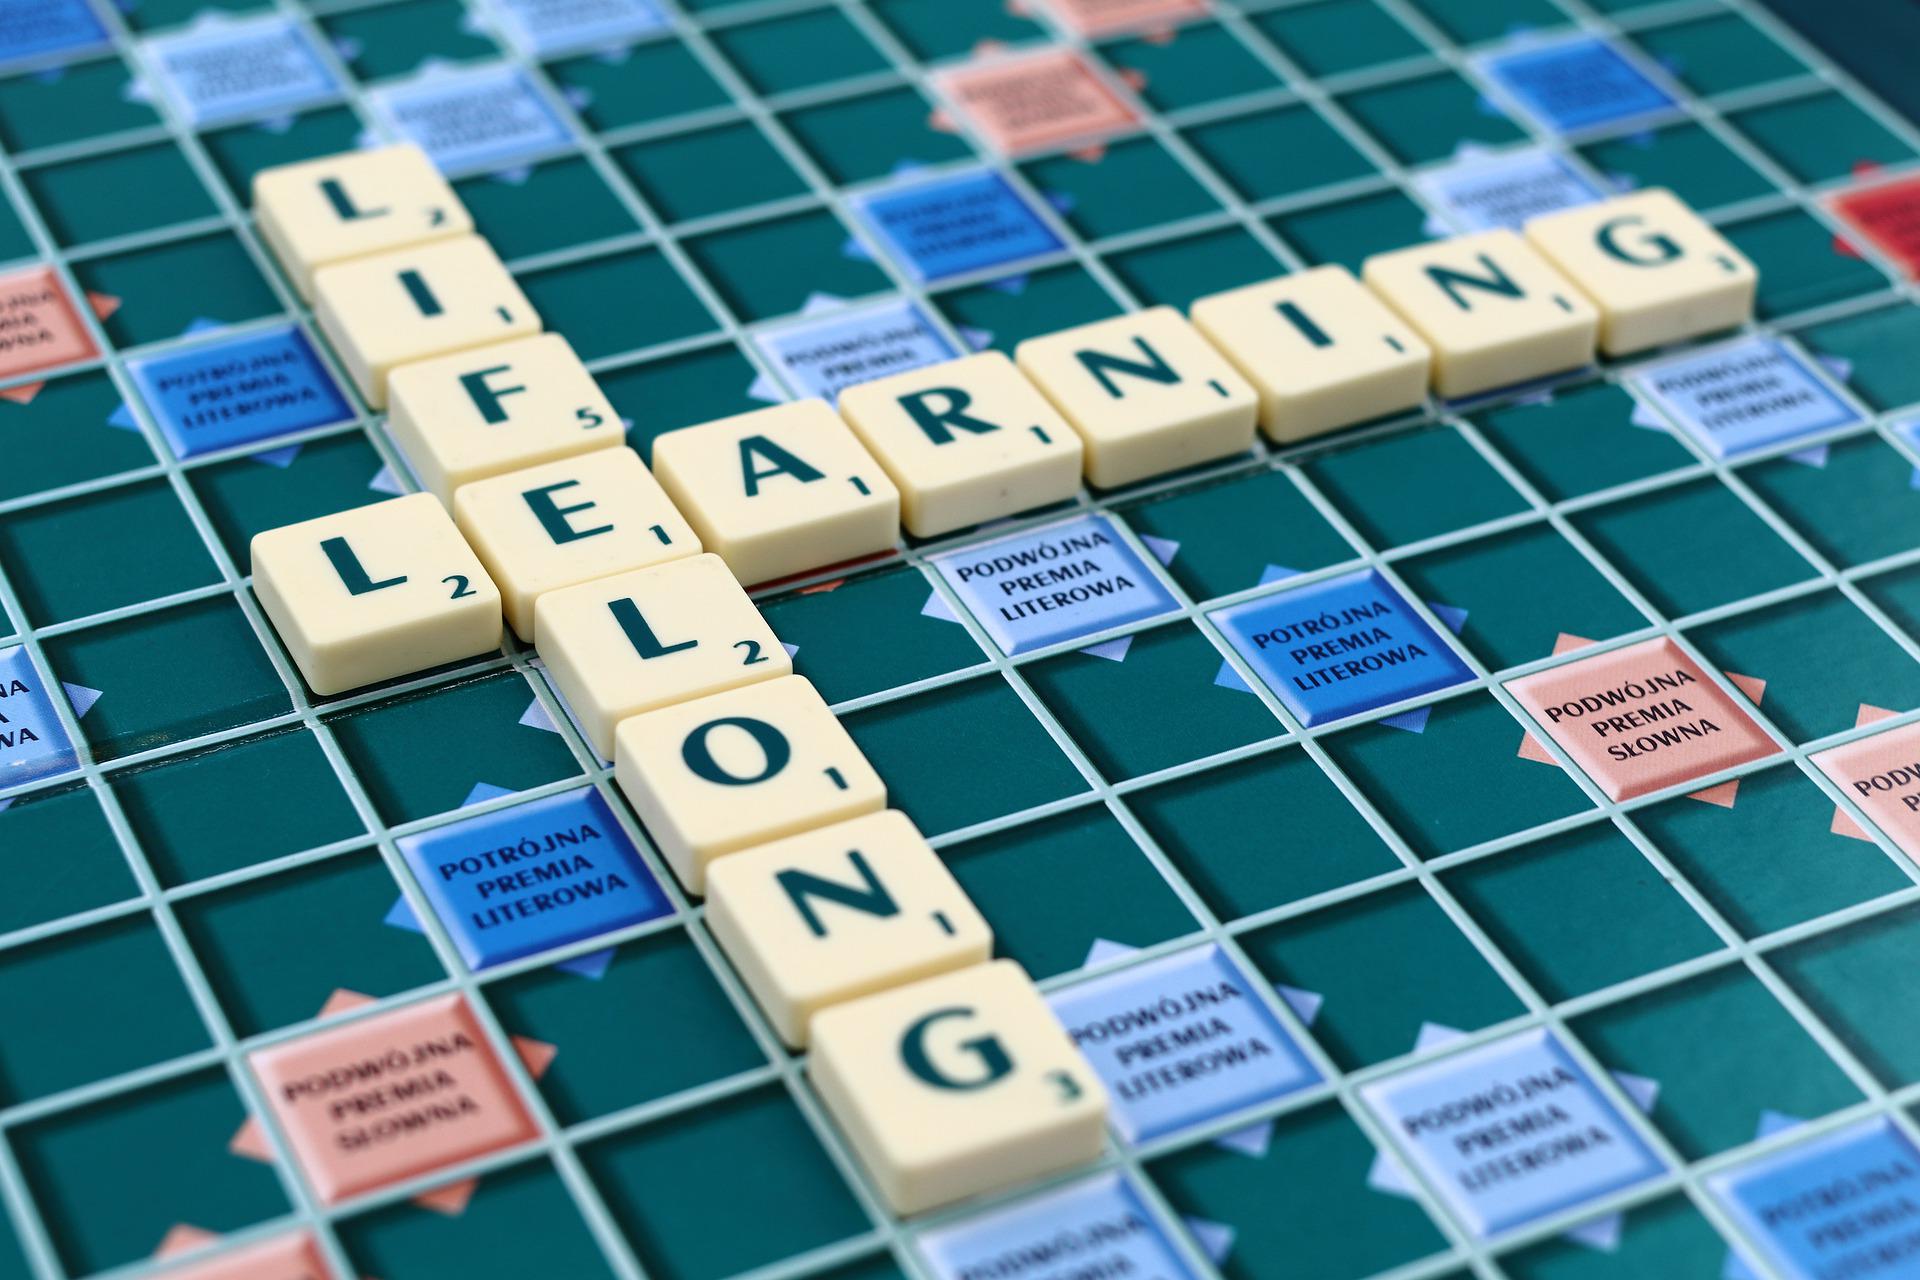 The ultimate word search engine to always win in Aworded, Scrabble and Wordle